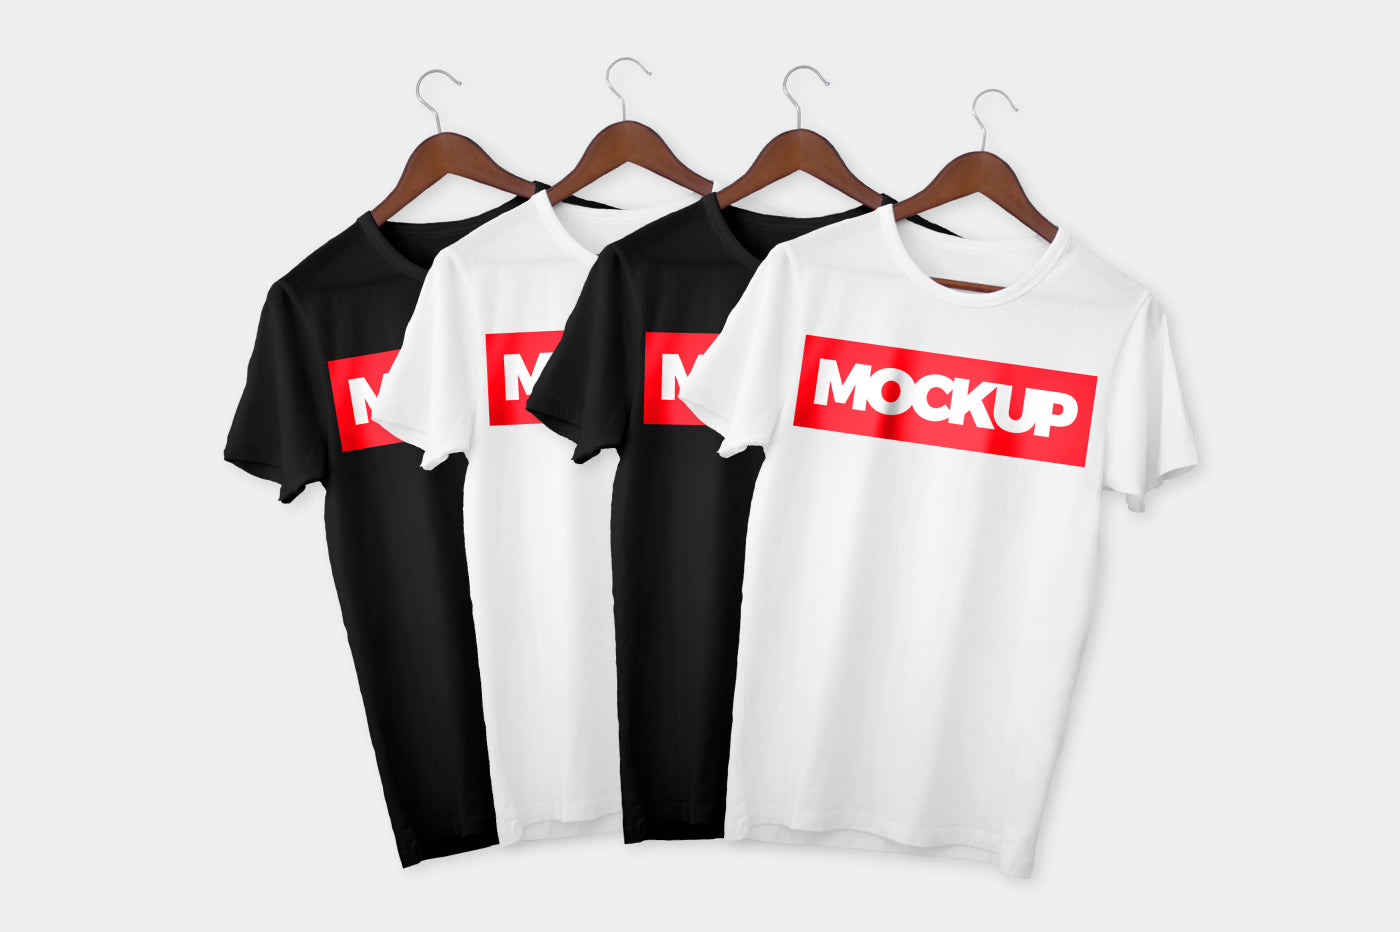 Free T-Shirt Mockup with Amazing Details